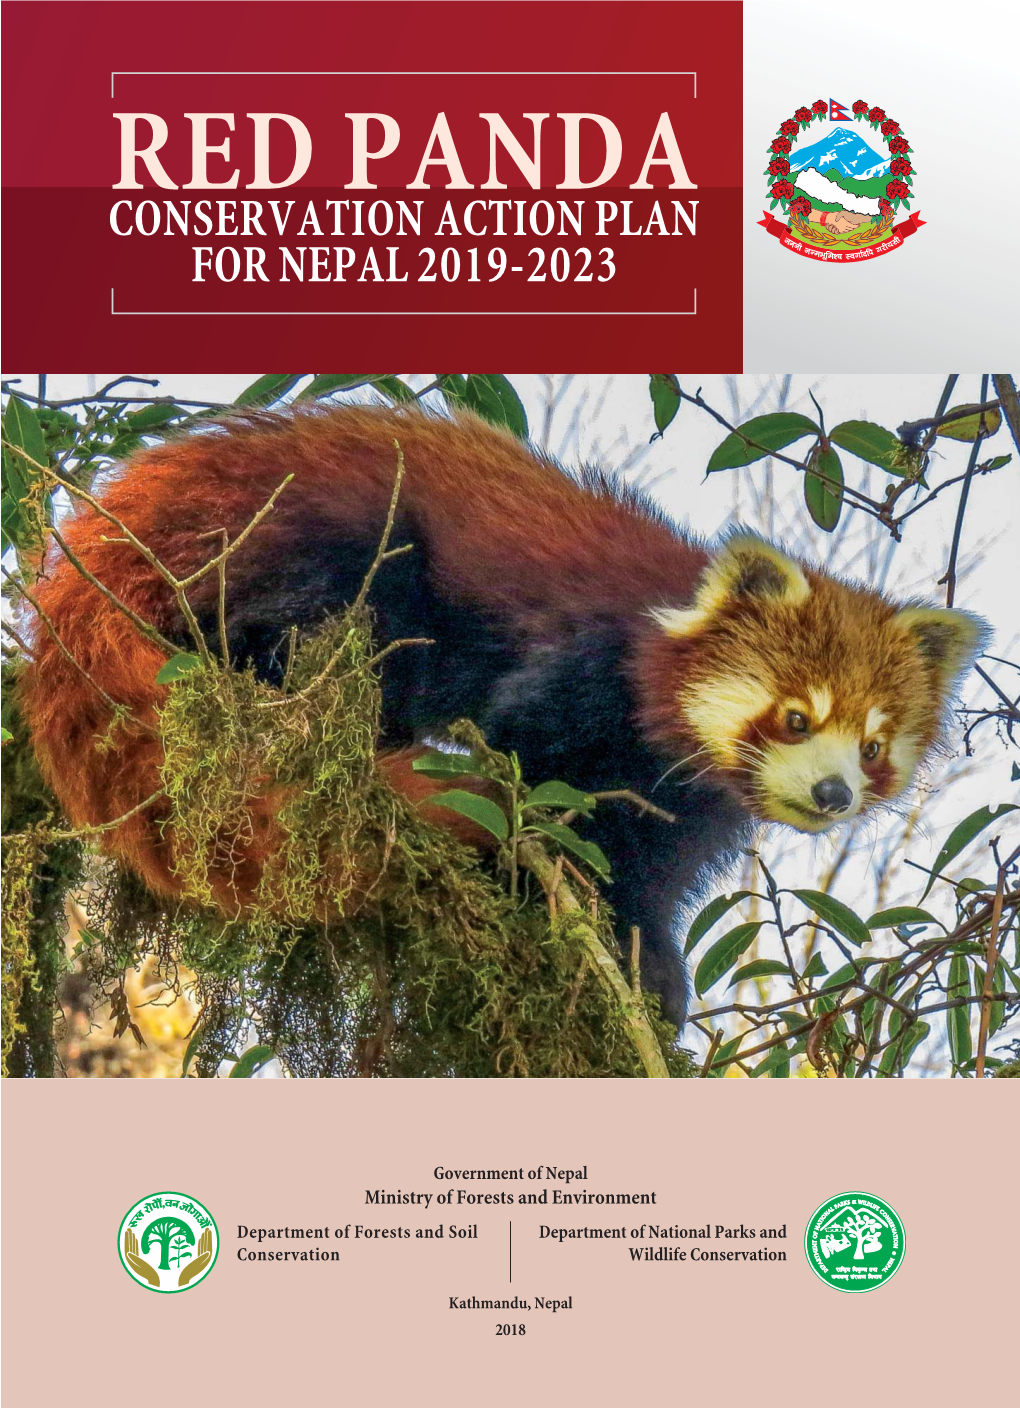 Red Panda Conservation Action Plan for Nepal 2019-2023